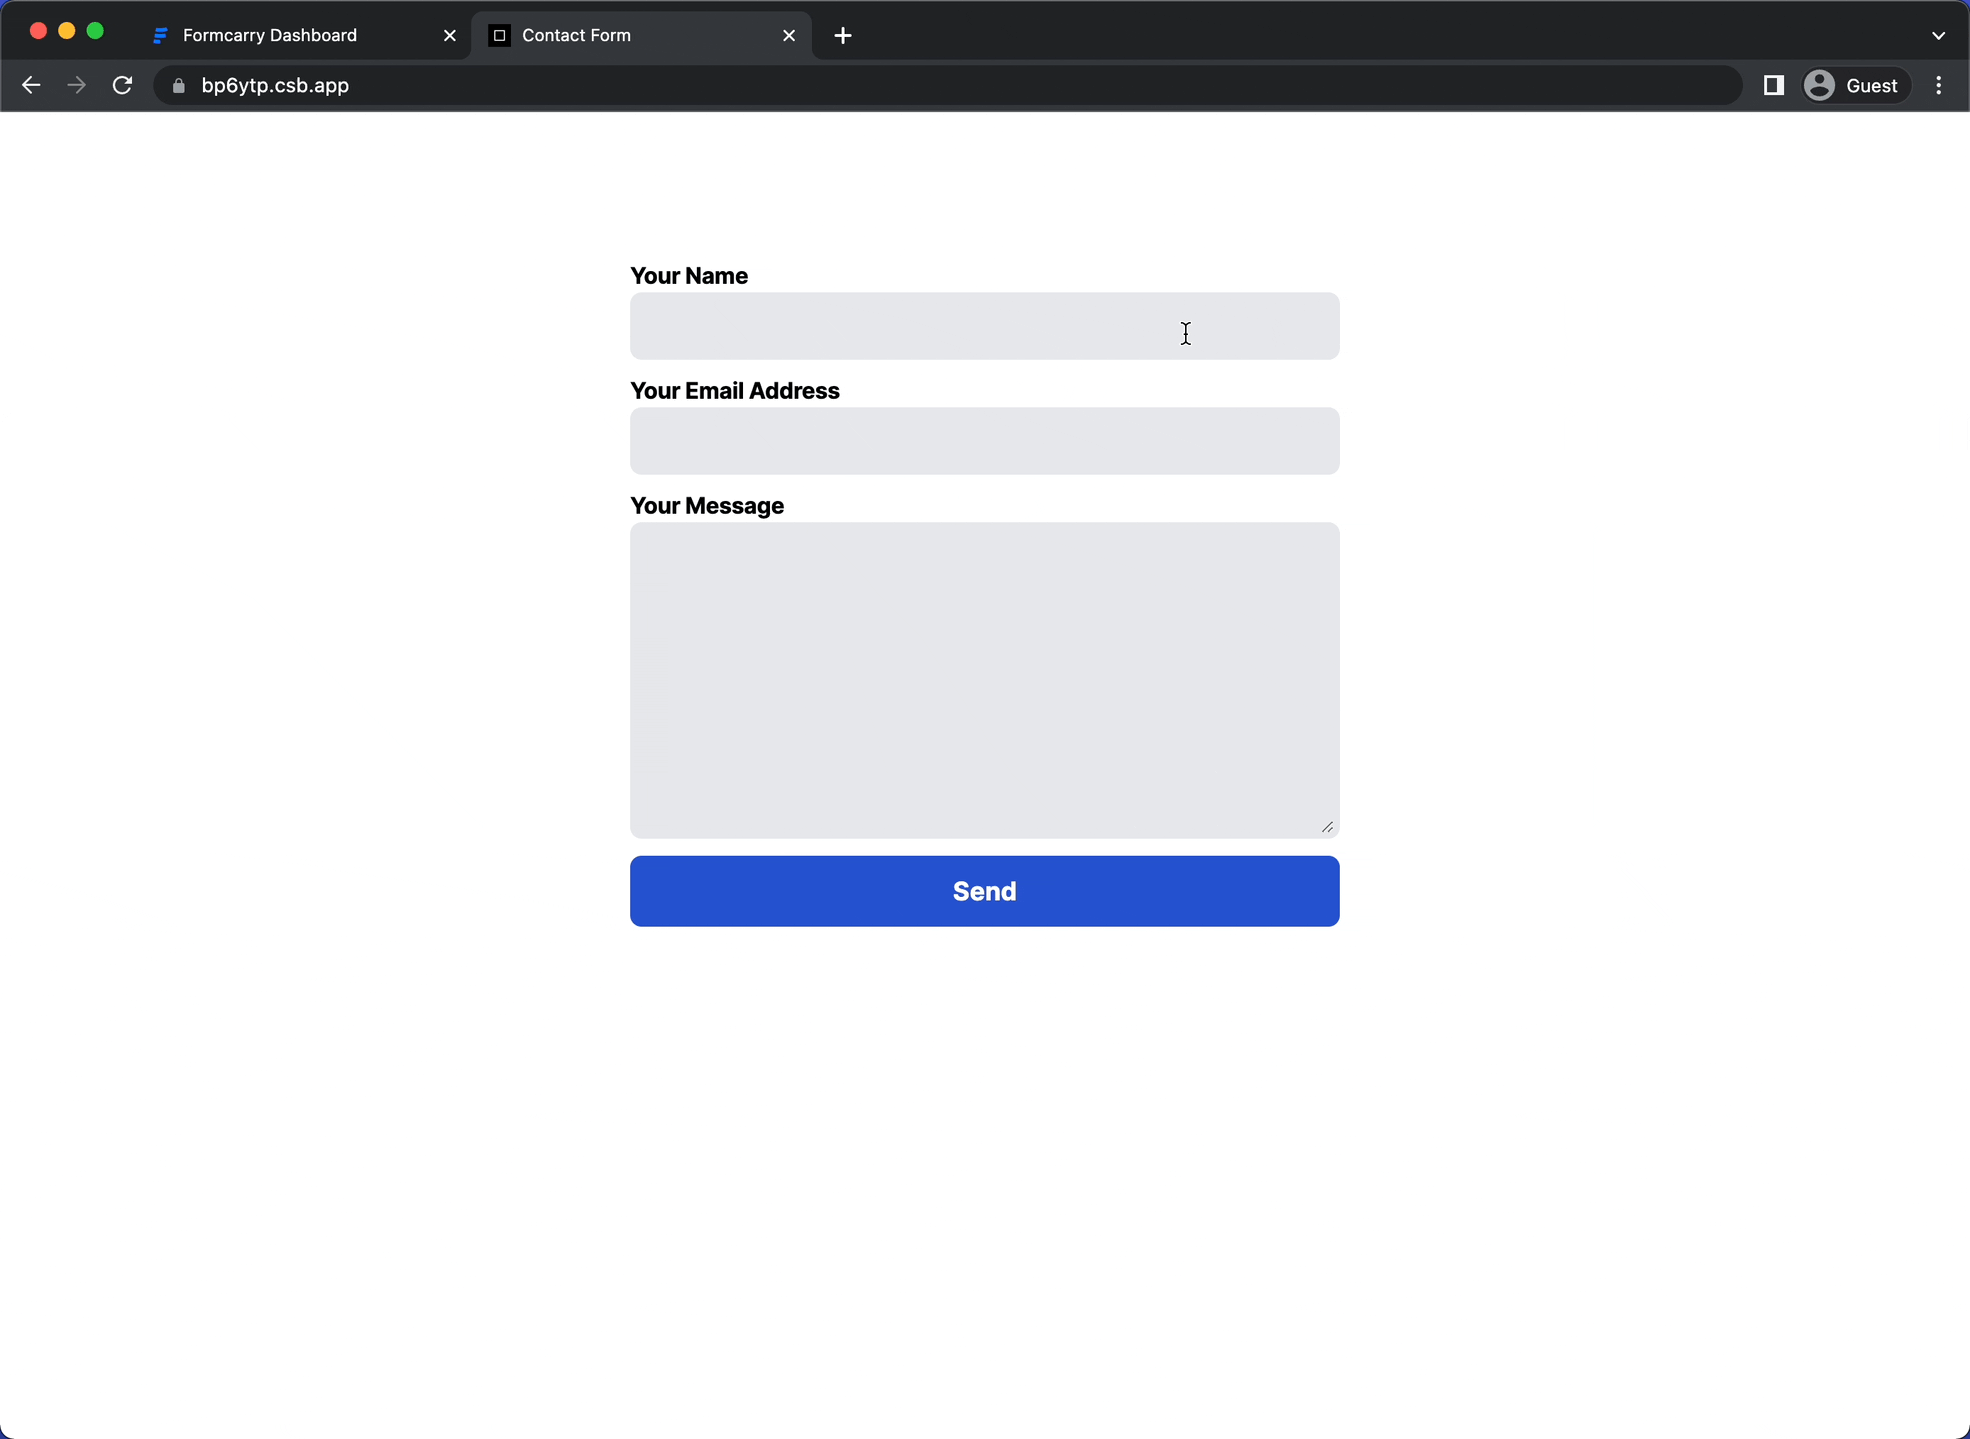 How to create a working contact form with HTML